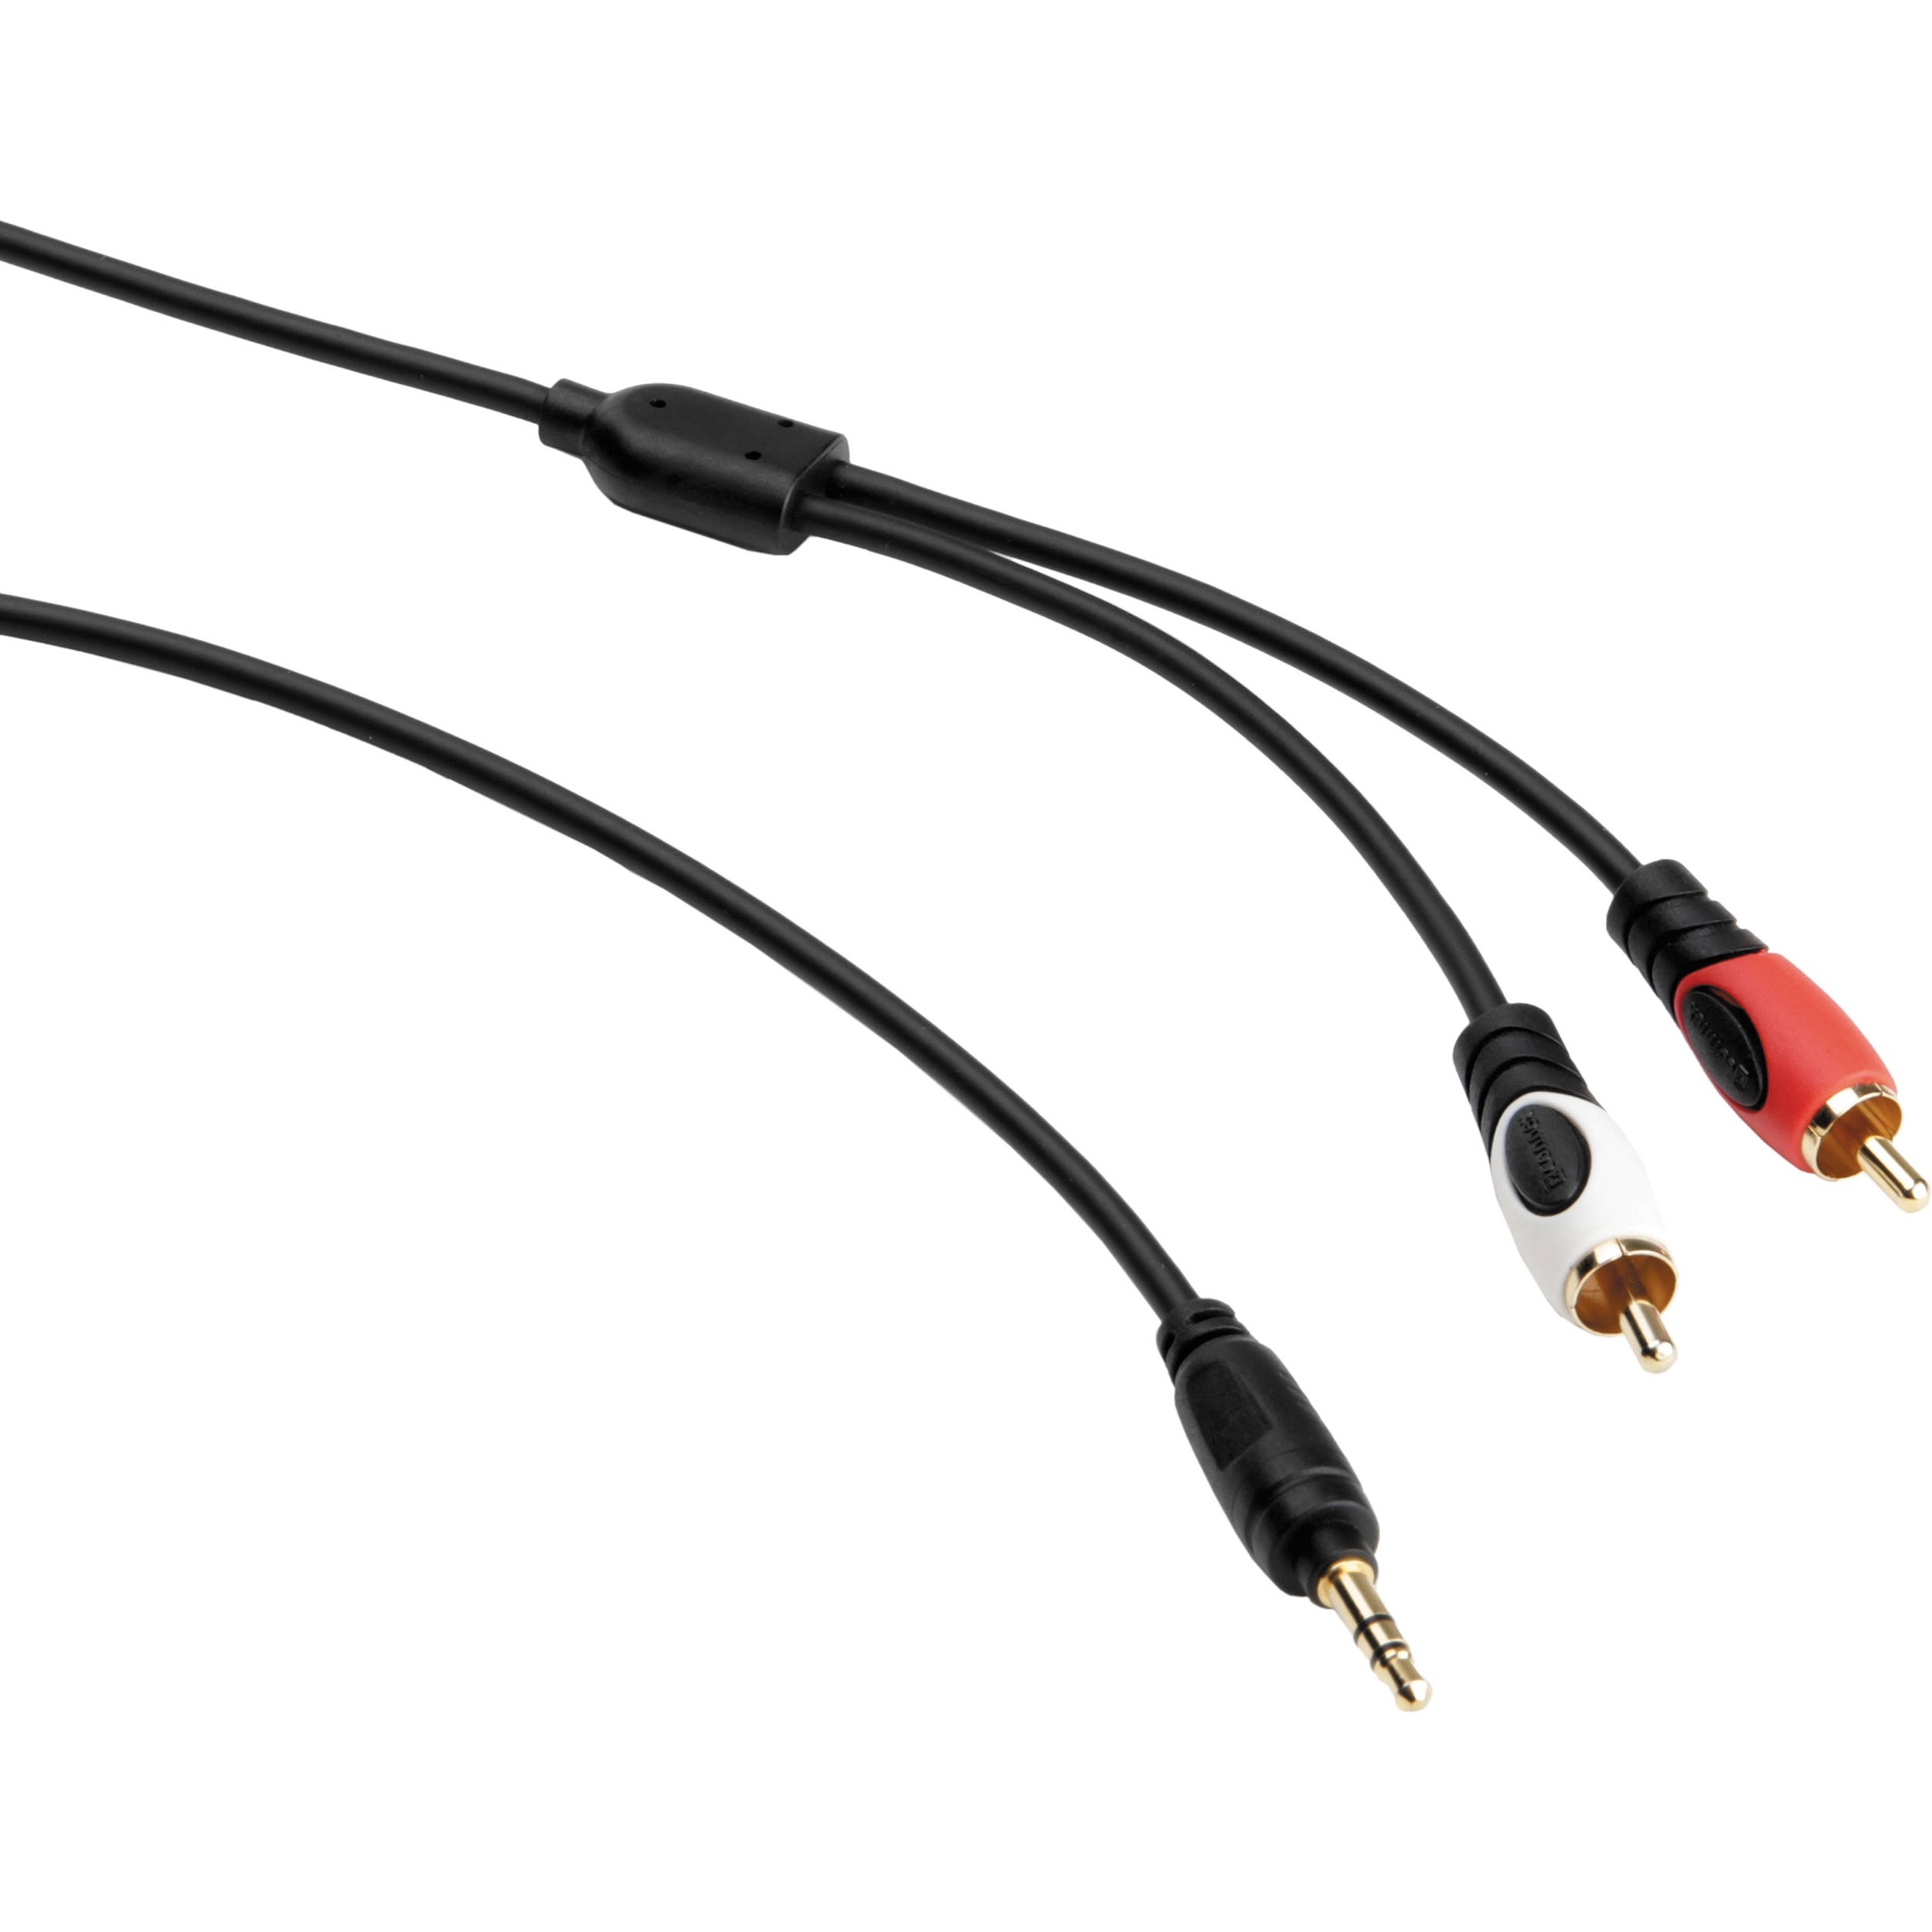 Pearstone 1/8" Stereo Mini to Dual RCA Y-Cable (3')